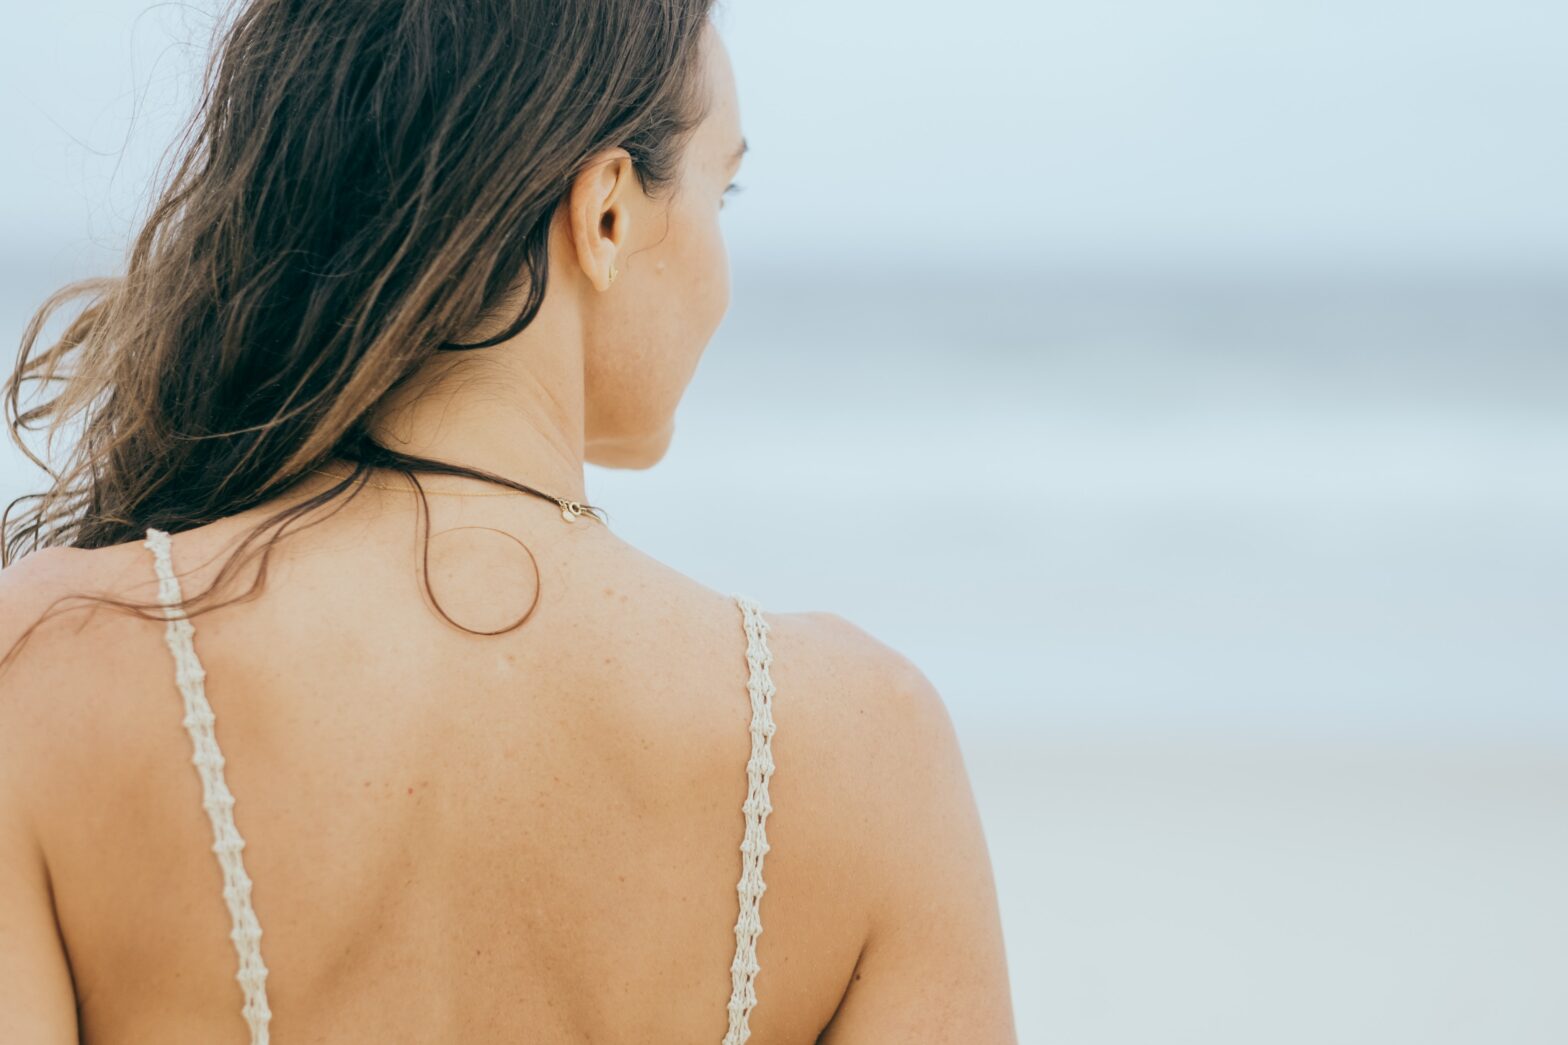 Skin cancer: Everything you need to know and how to prevent it